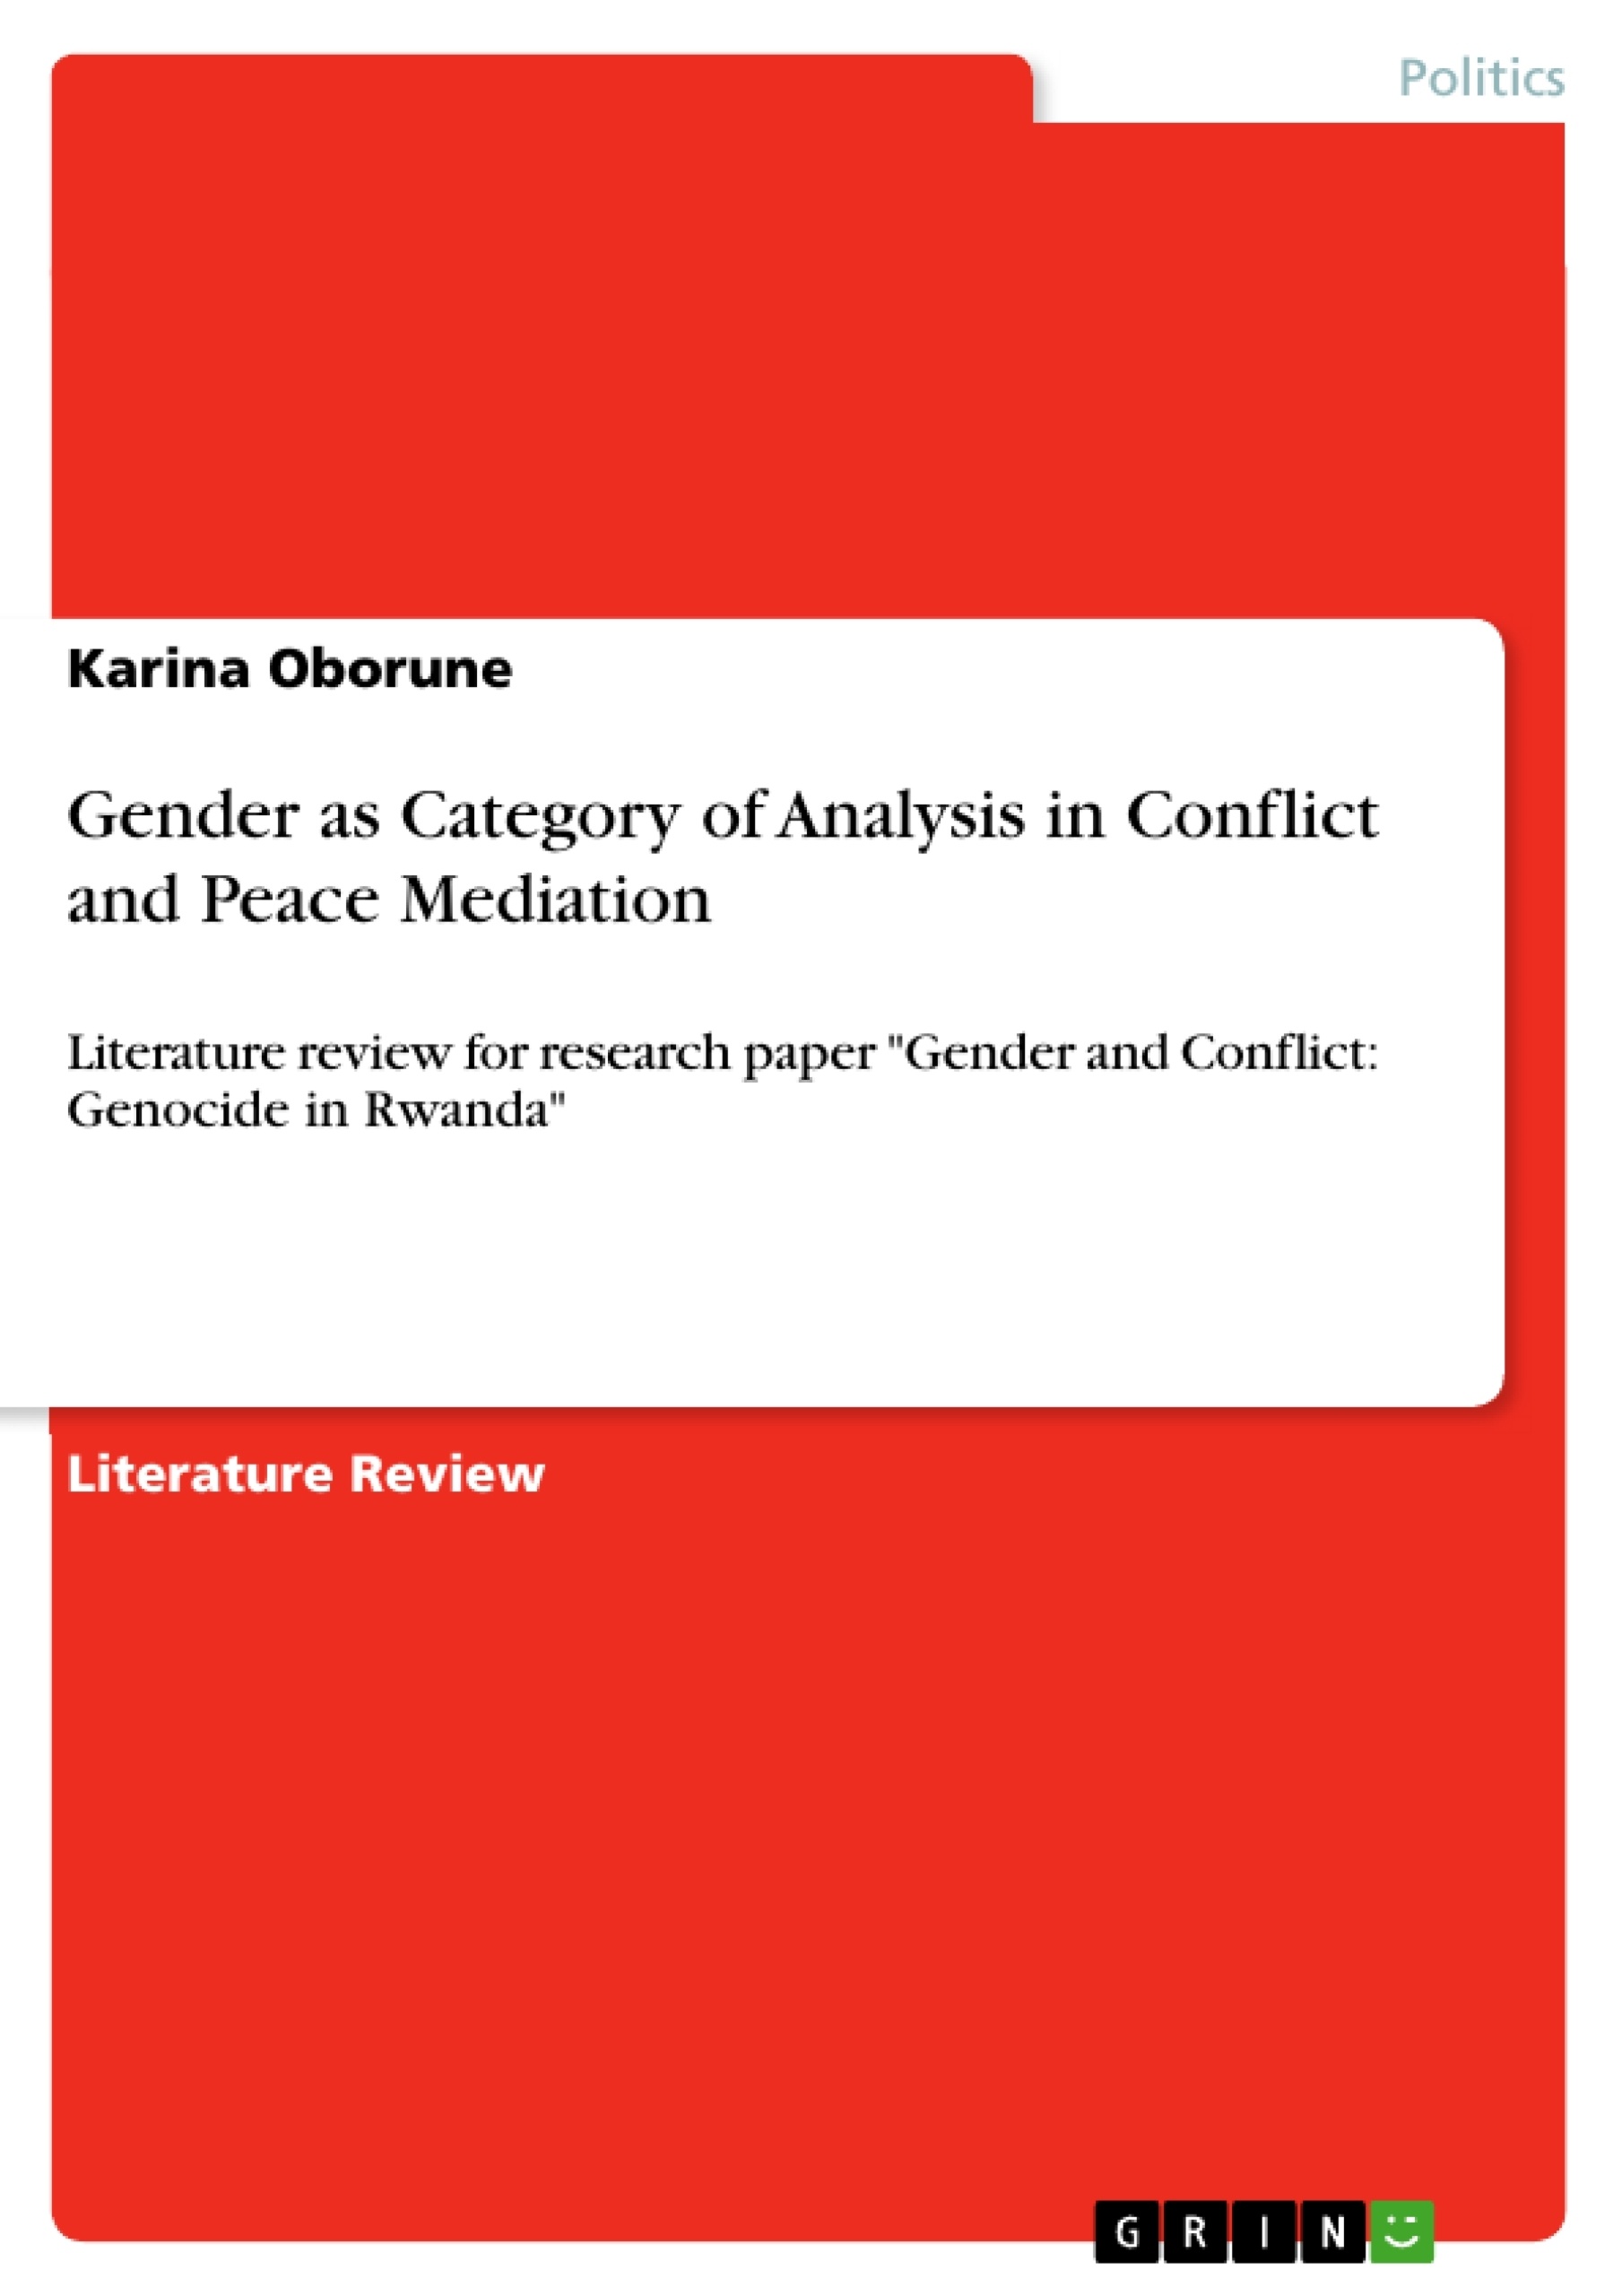 Título: Gender as Category of Analysis in Conflict and Peace Mediation